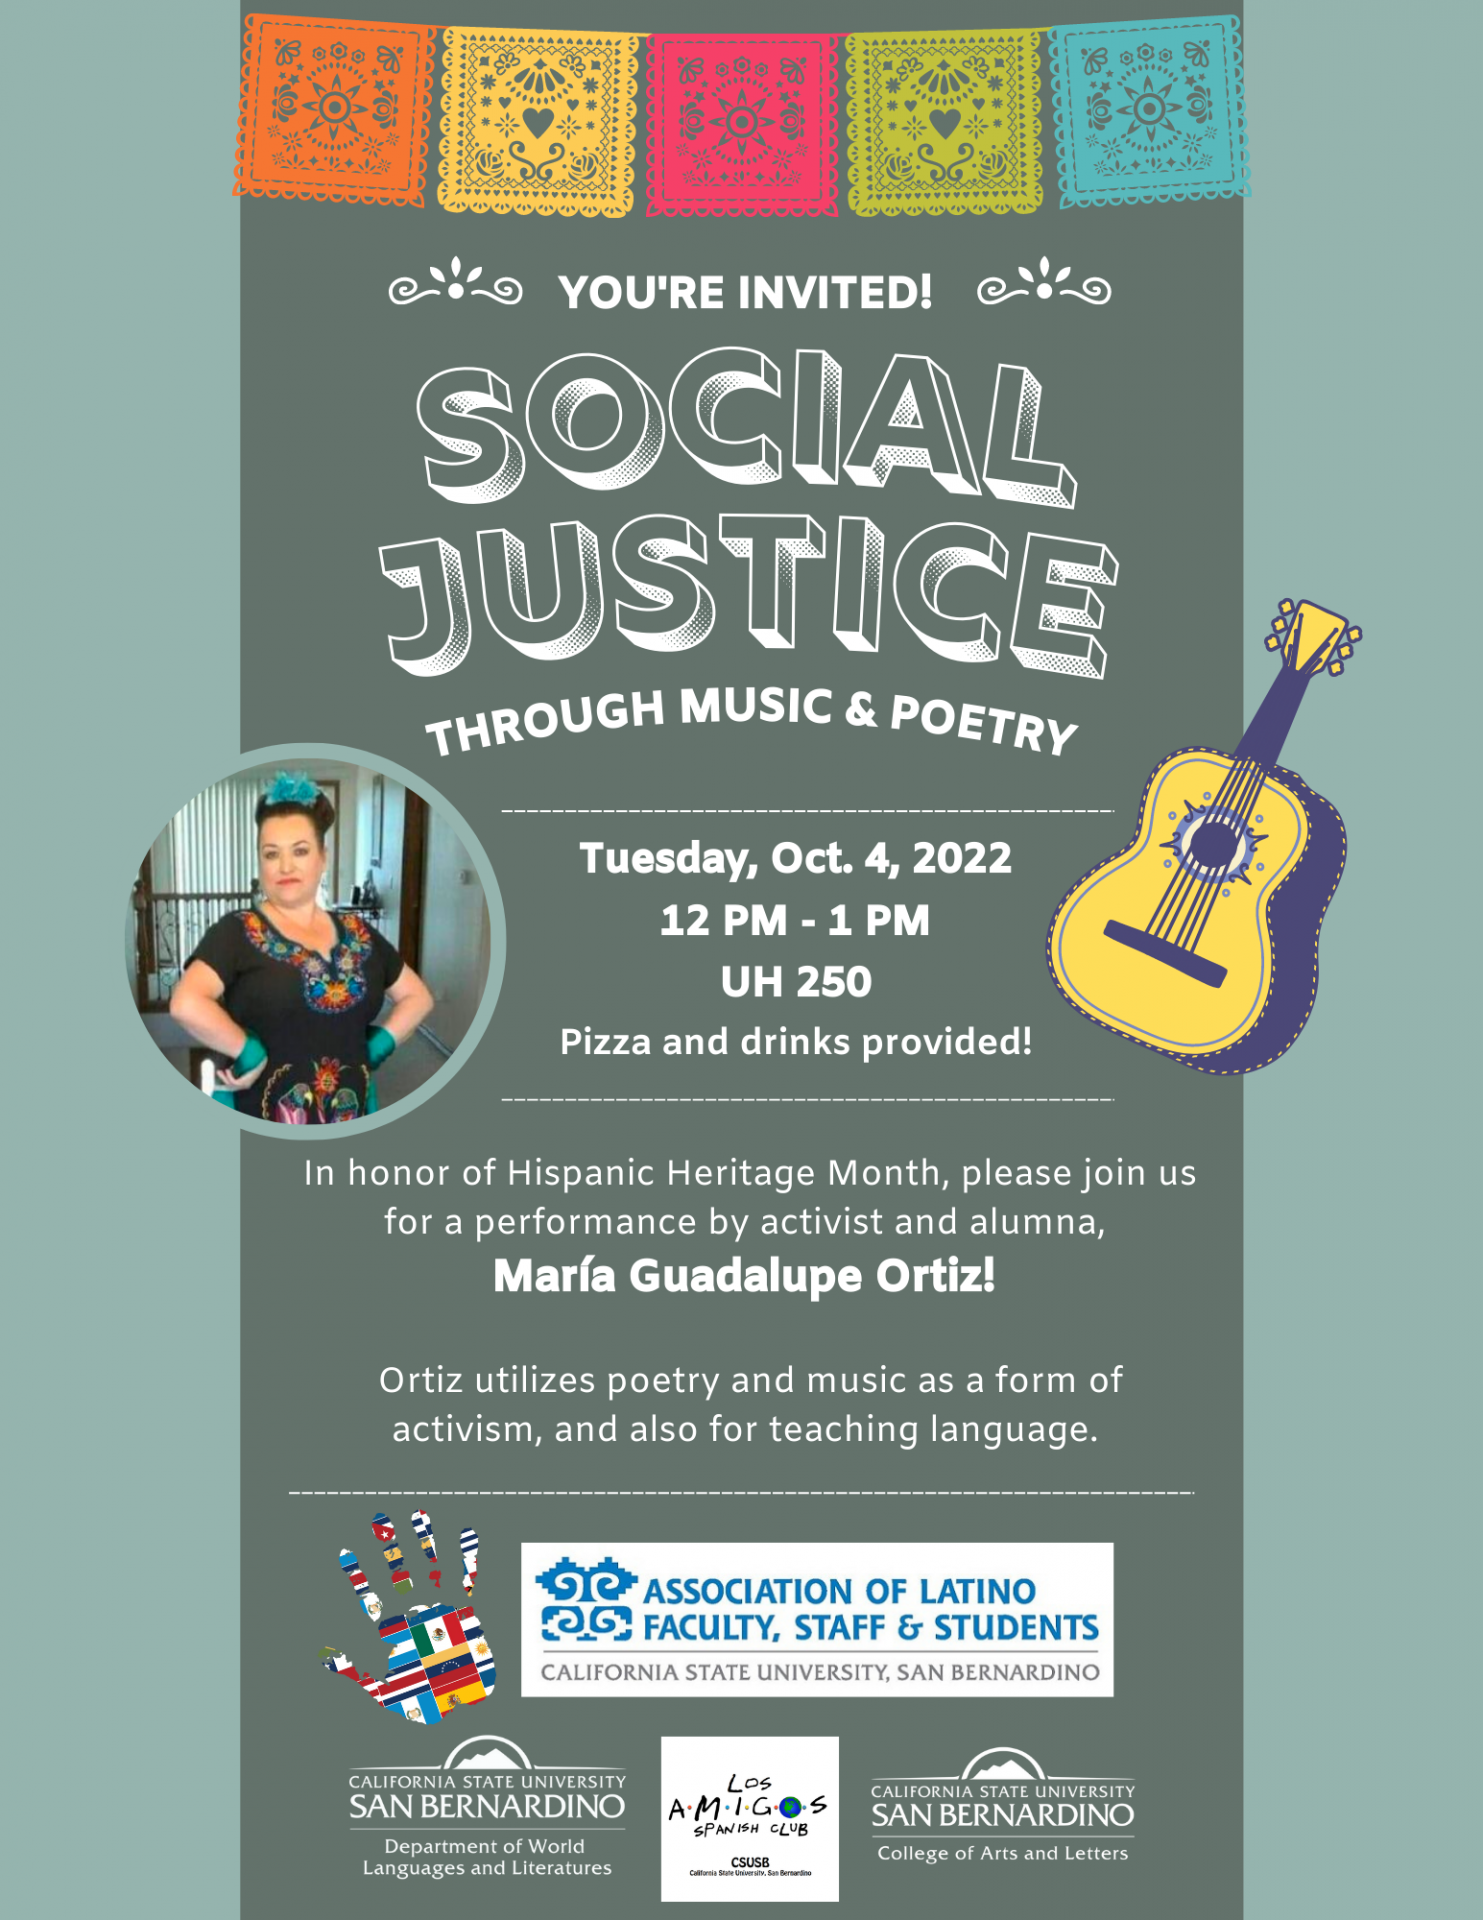 Social Justice Through Poetry event flyer